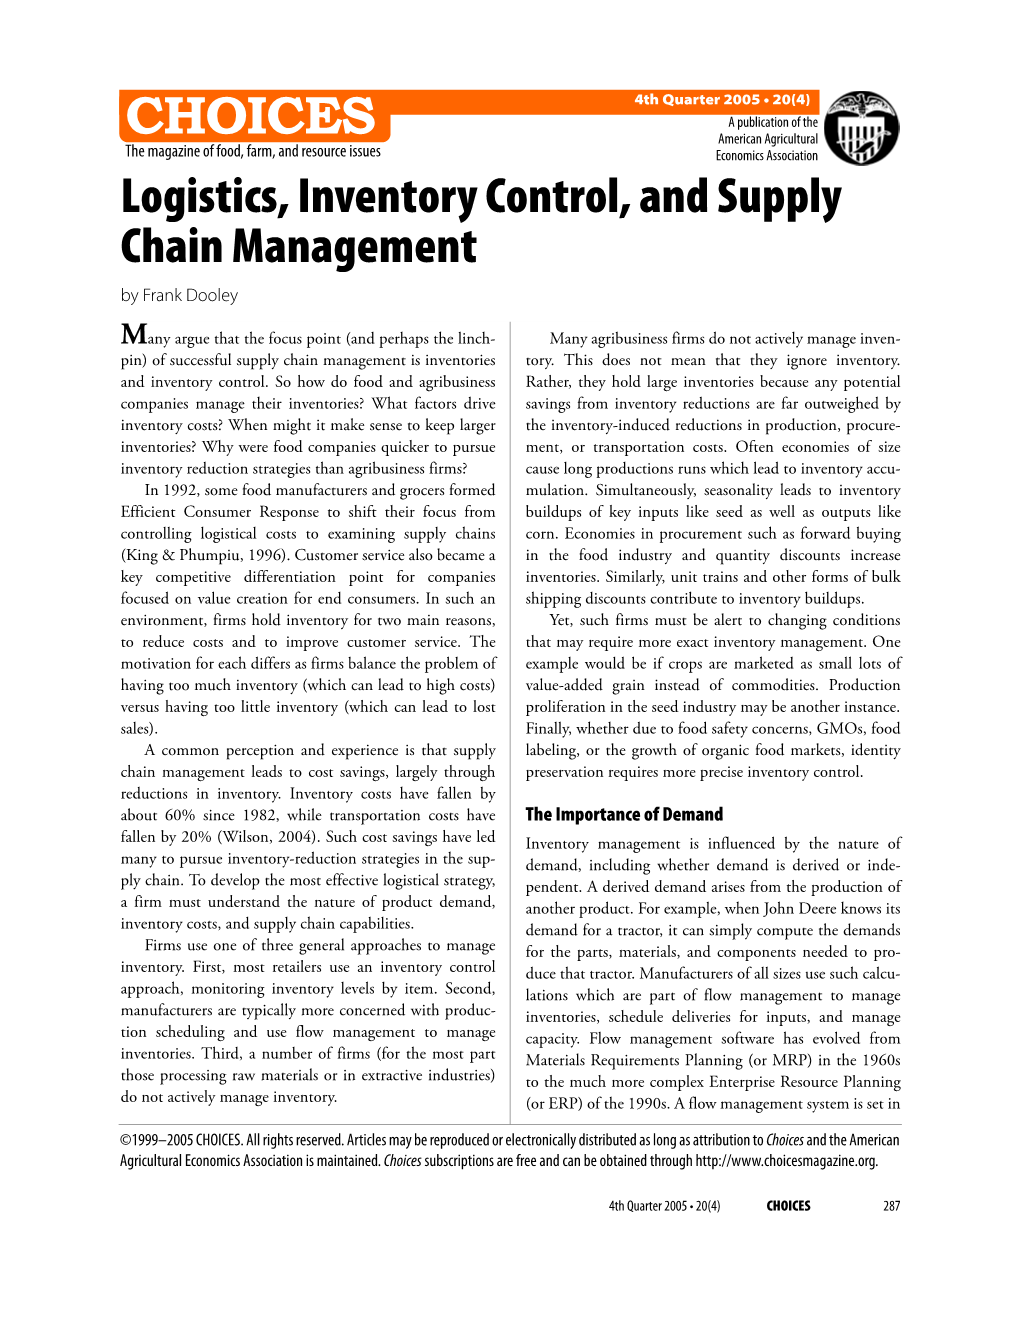 Logistics, Inventory Control, and Supply Chain Management by Frank Dooley